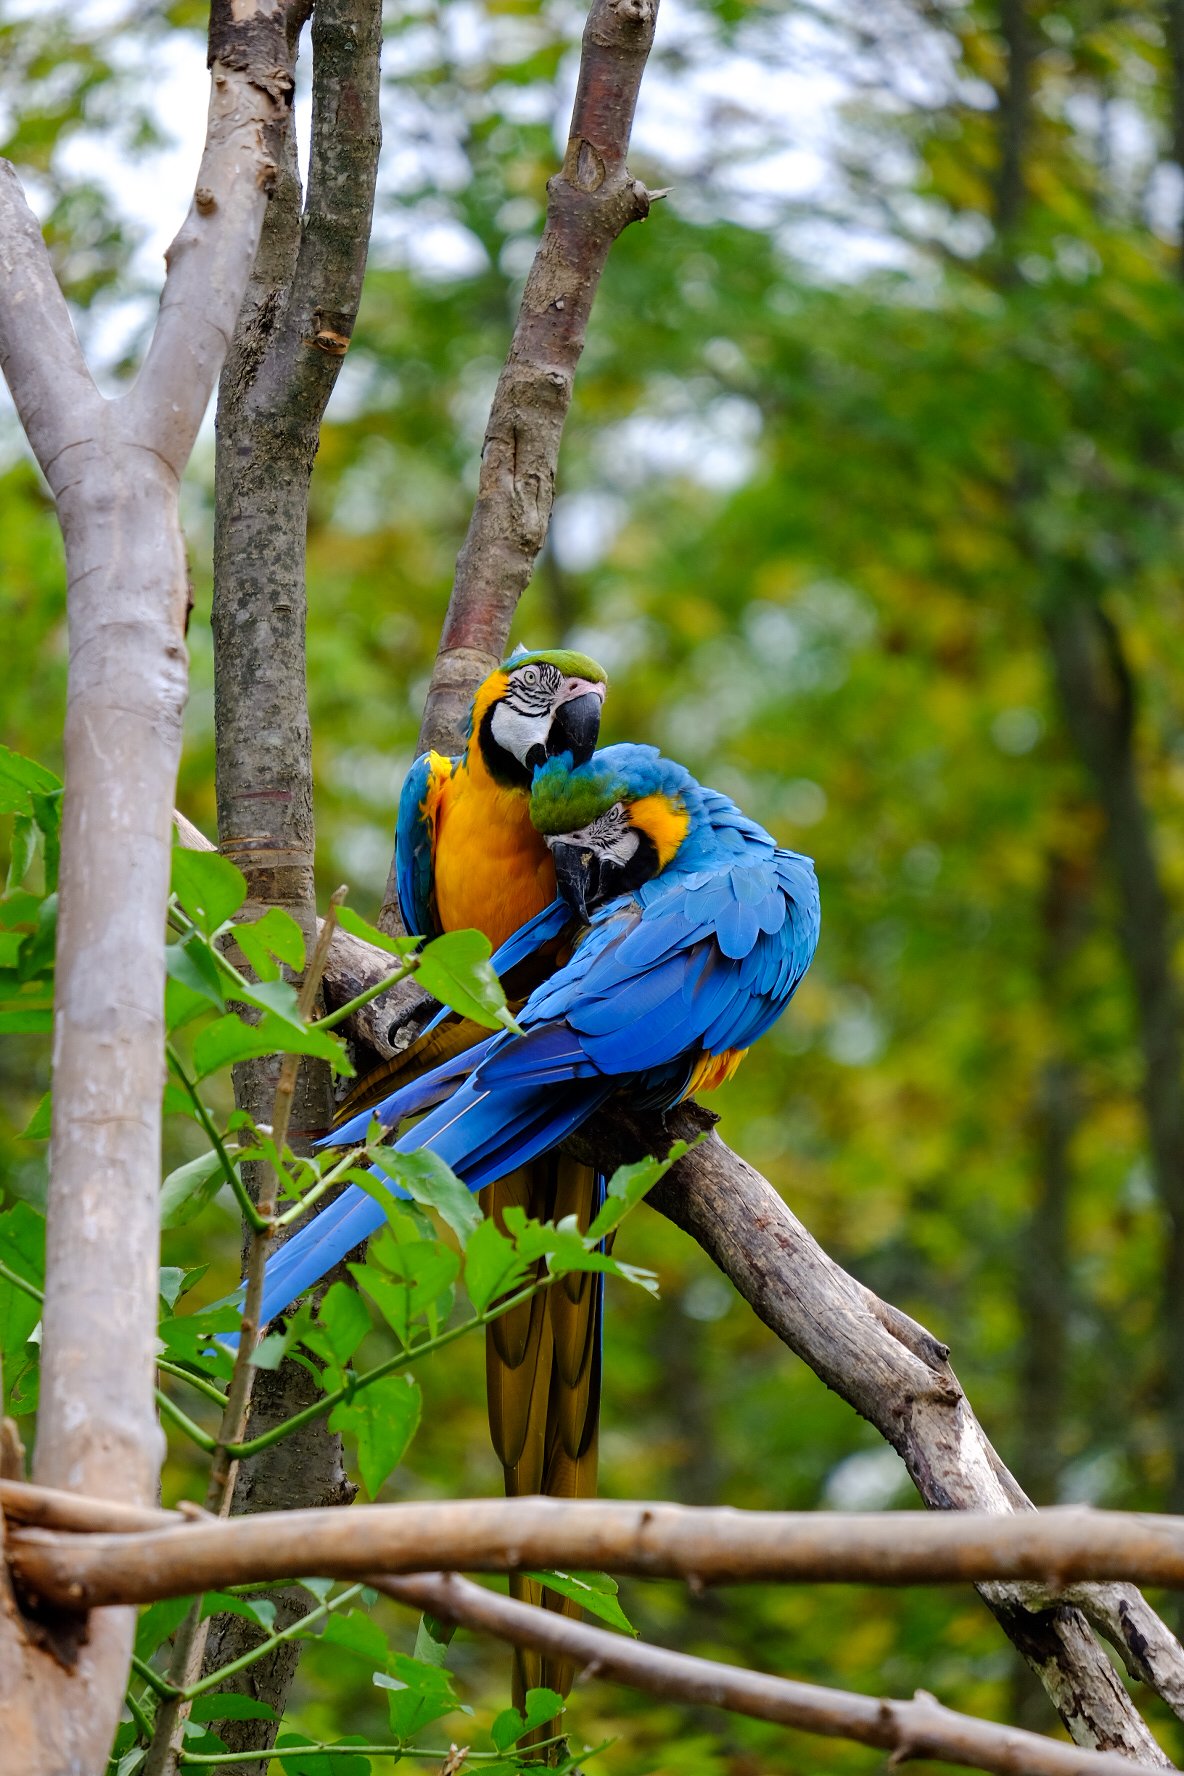  Two macaws in love at the Toronto Zoo in Toronto, Canada 